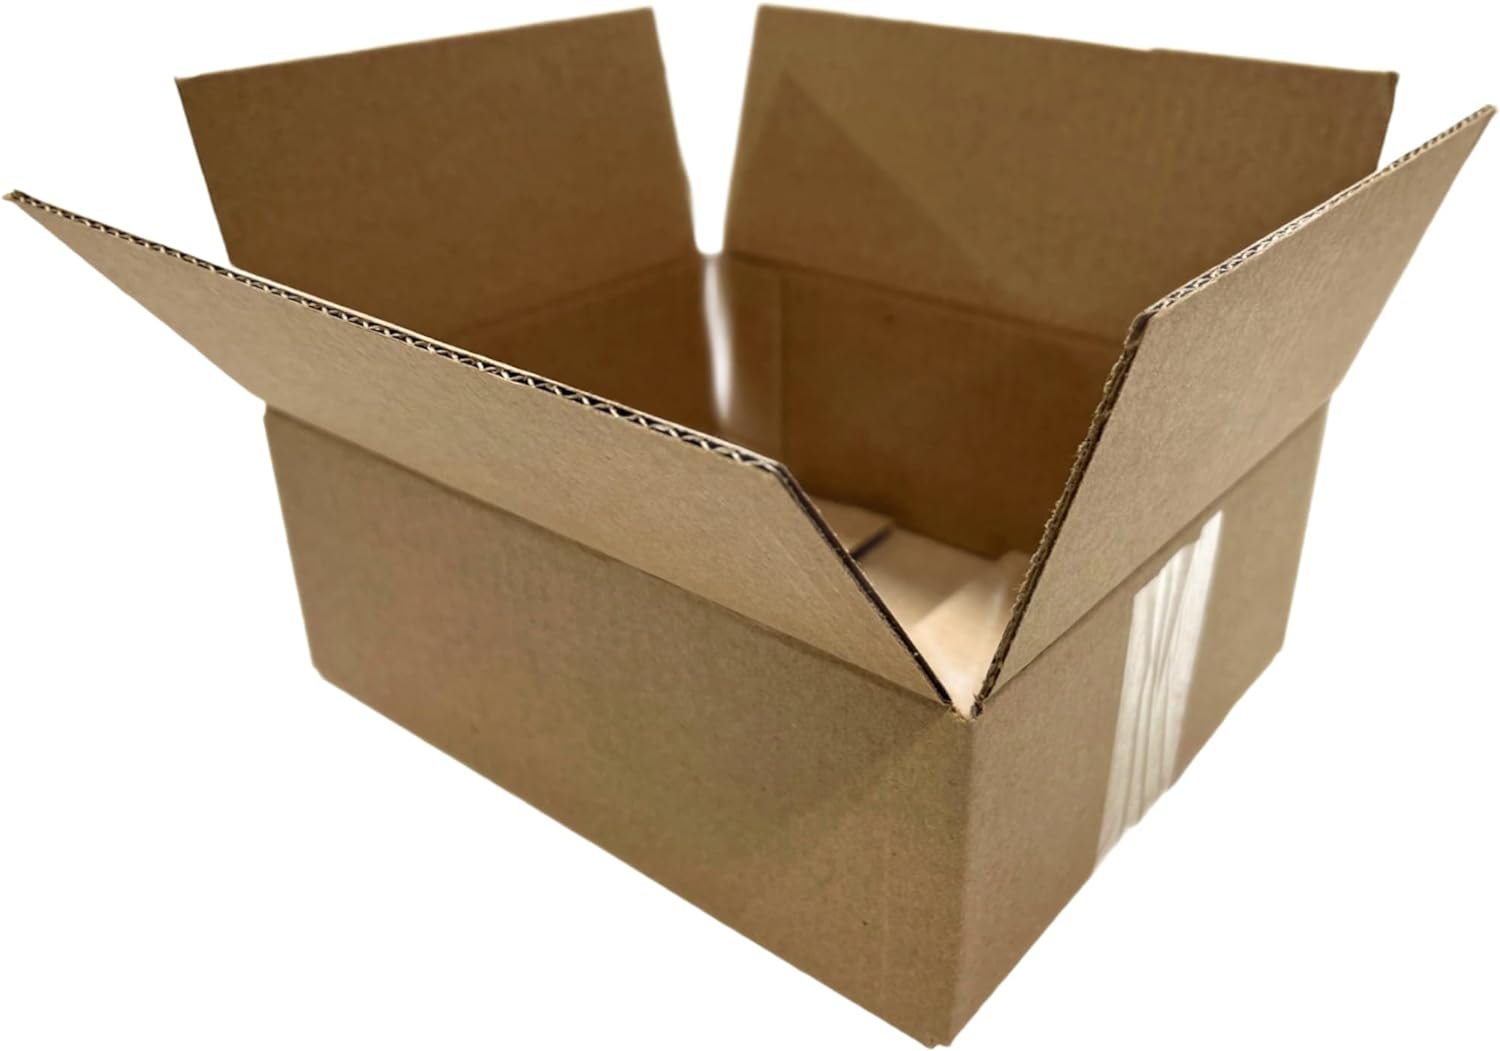 50 5x4x2 Cardboard Paper Boxes Mailing Packing Shipping Box Corrugated Carton